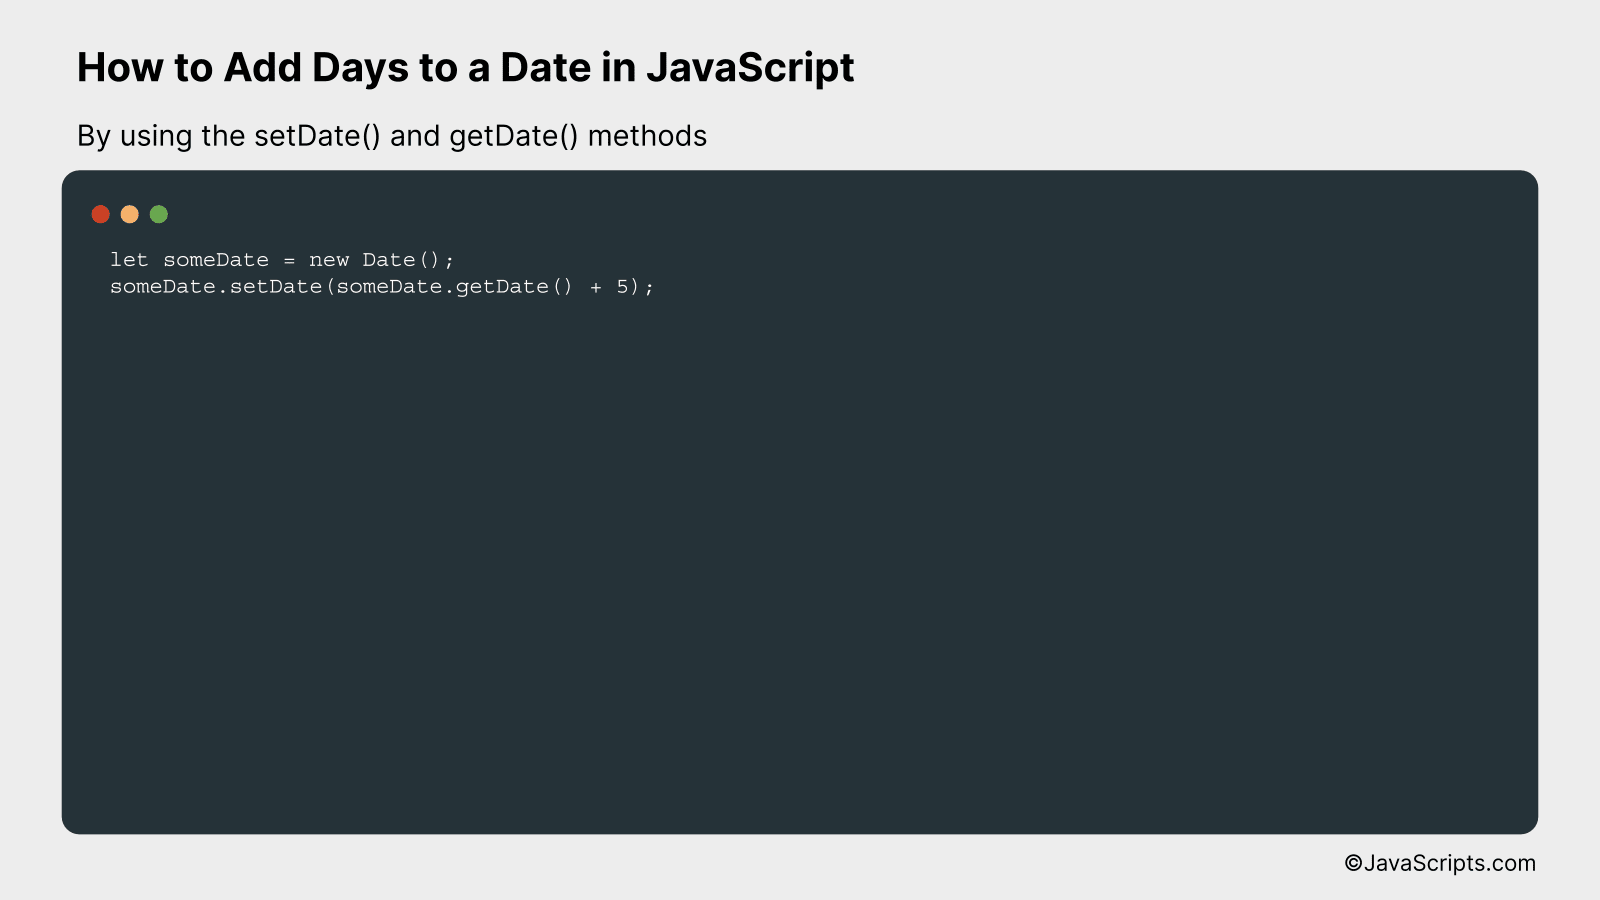 By using the setDate() and getDate() methods